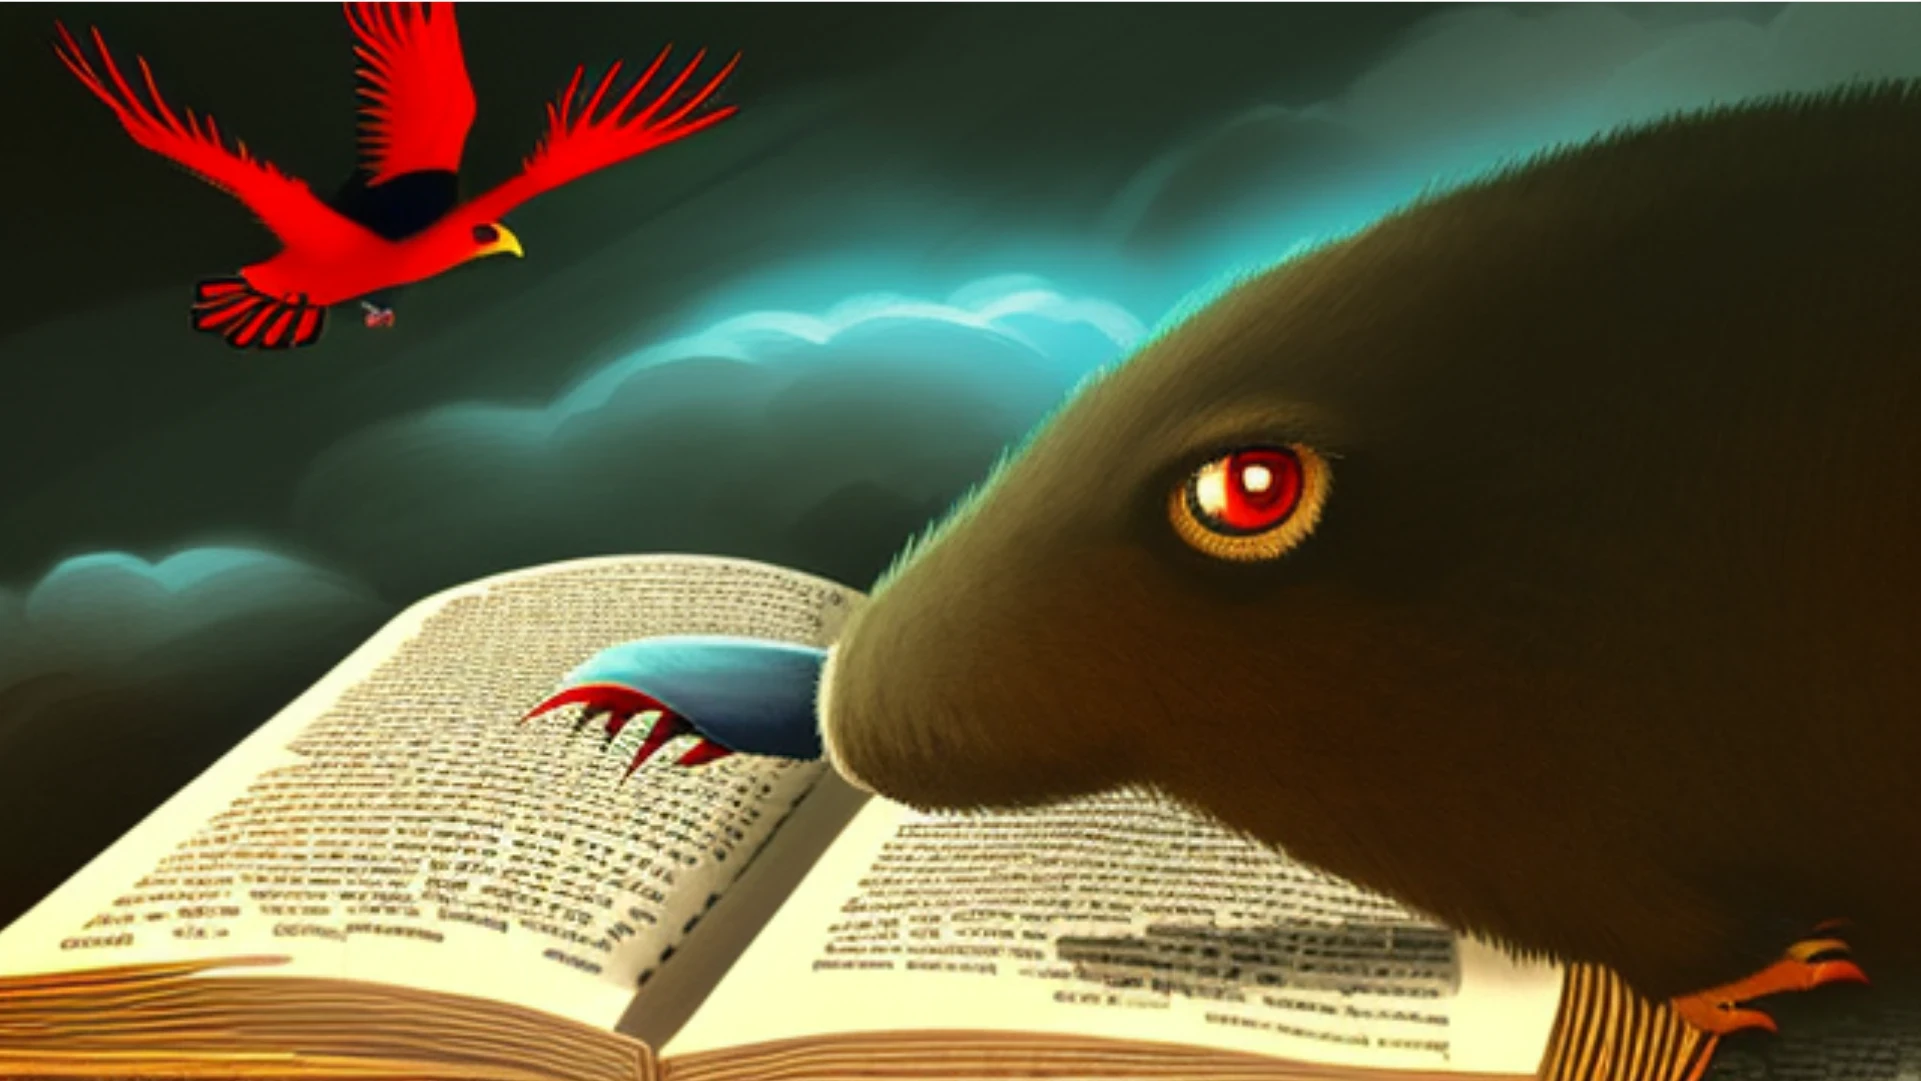 a monster is reading a red old book in the sky, dark light, birds perspective